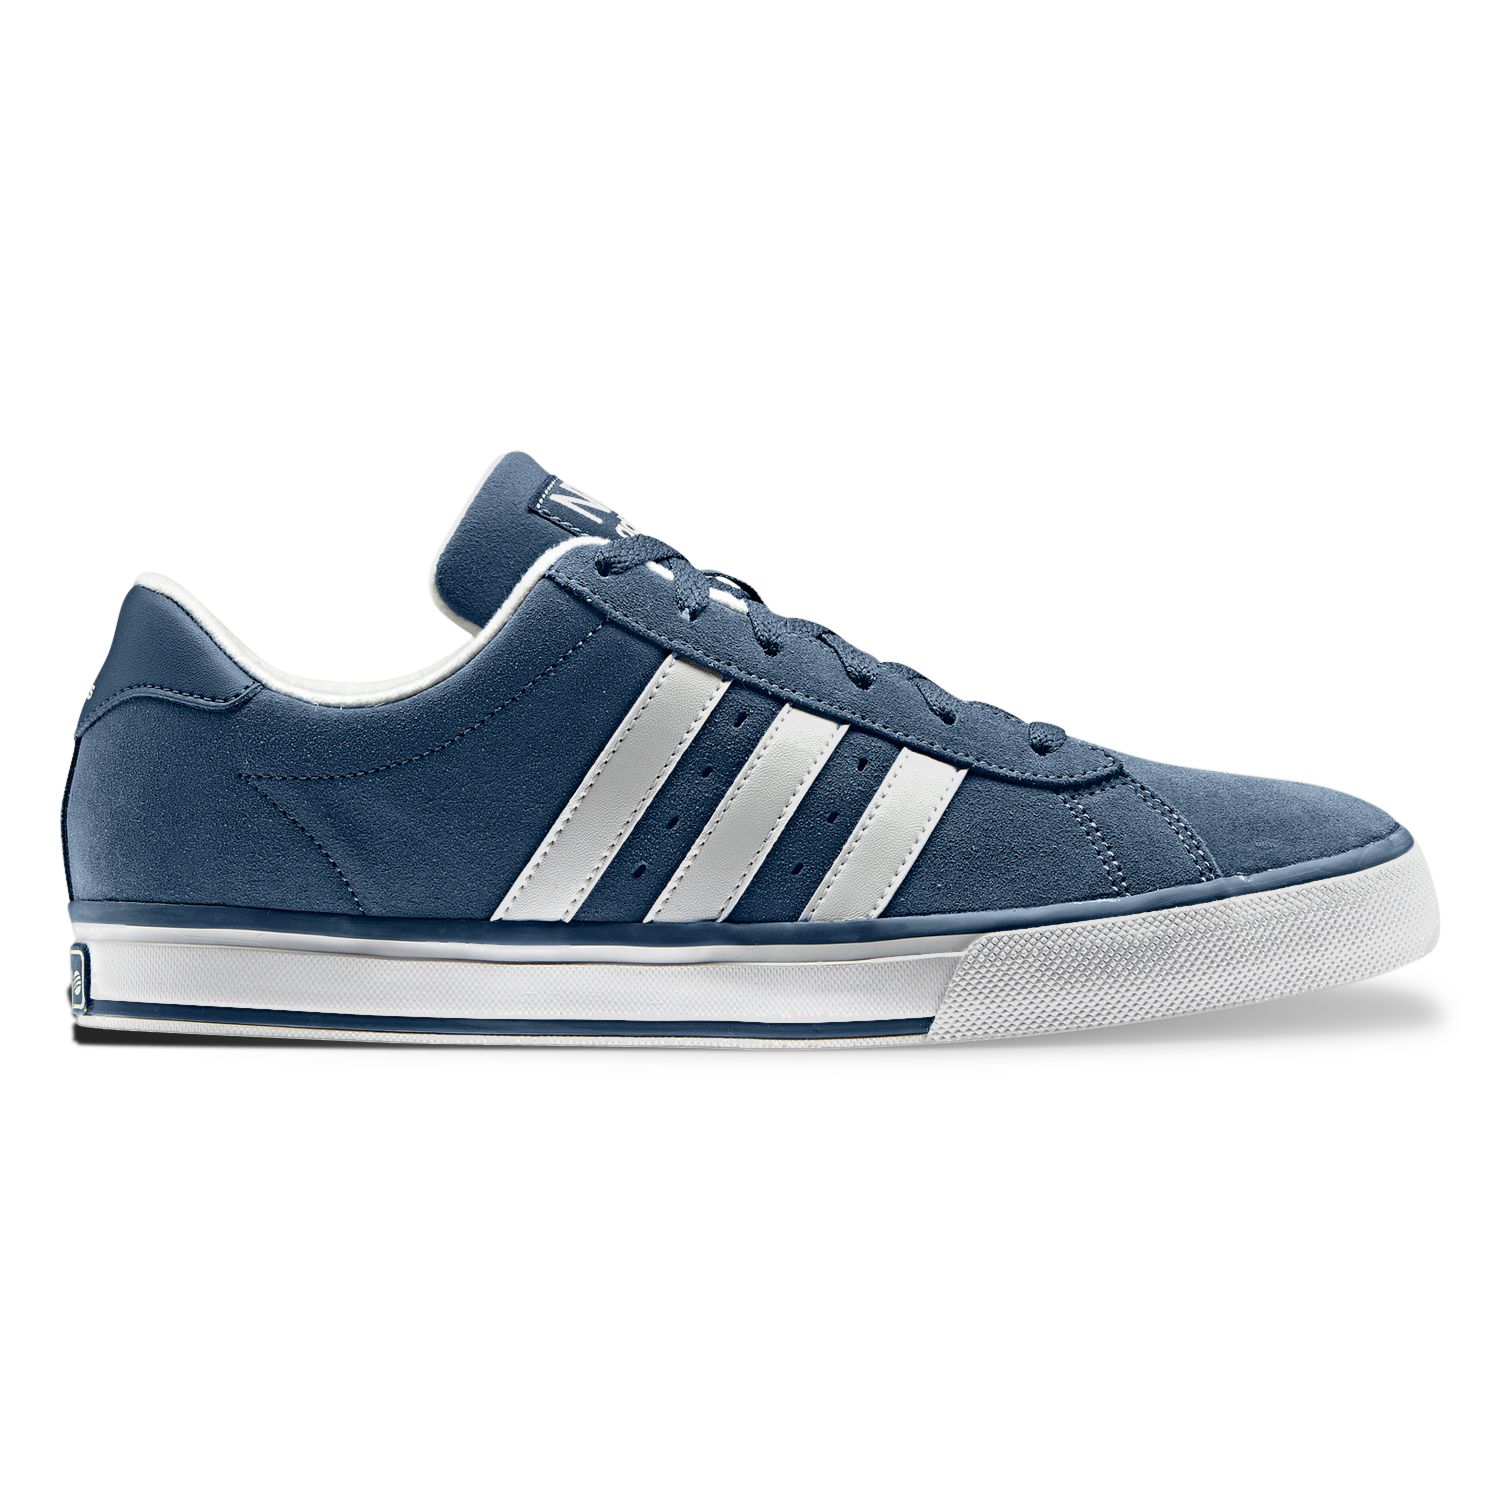 adidas neo shoes for men